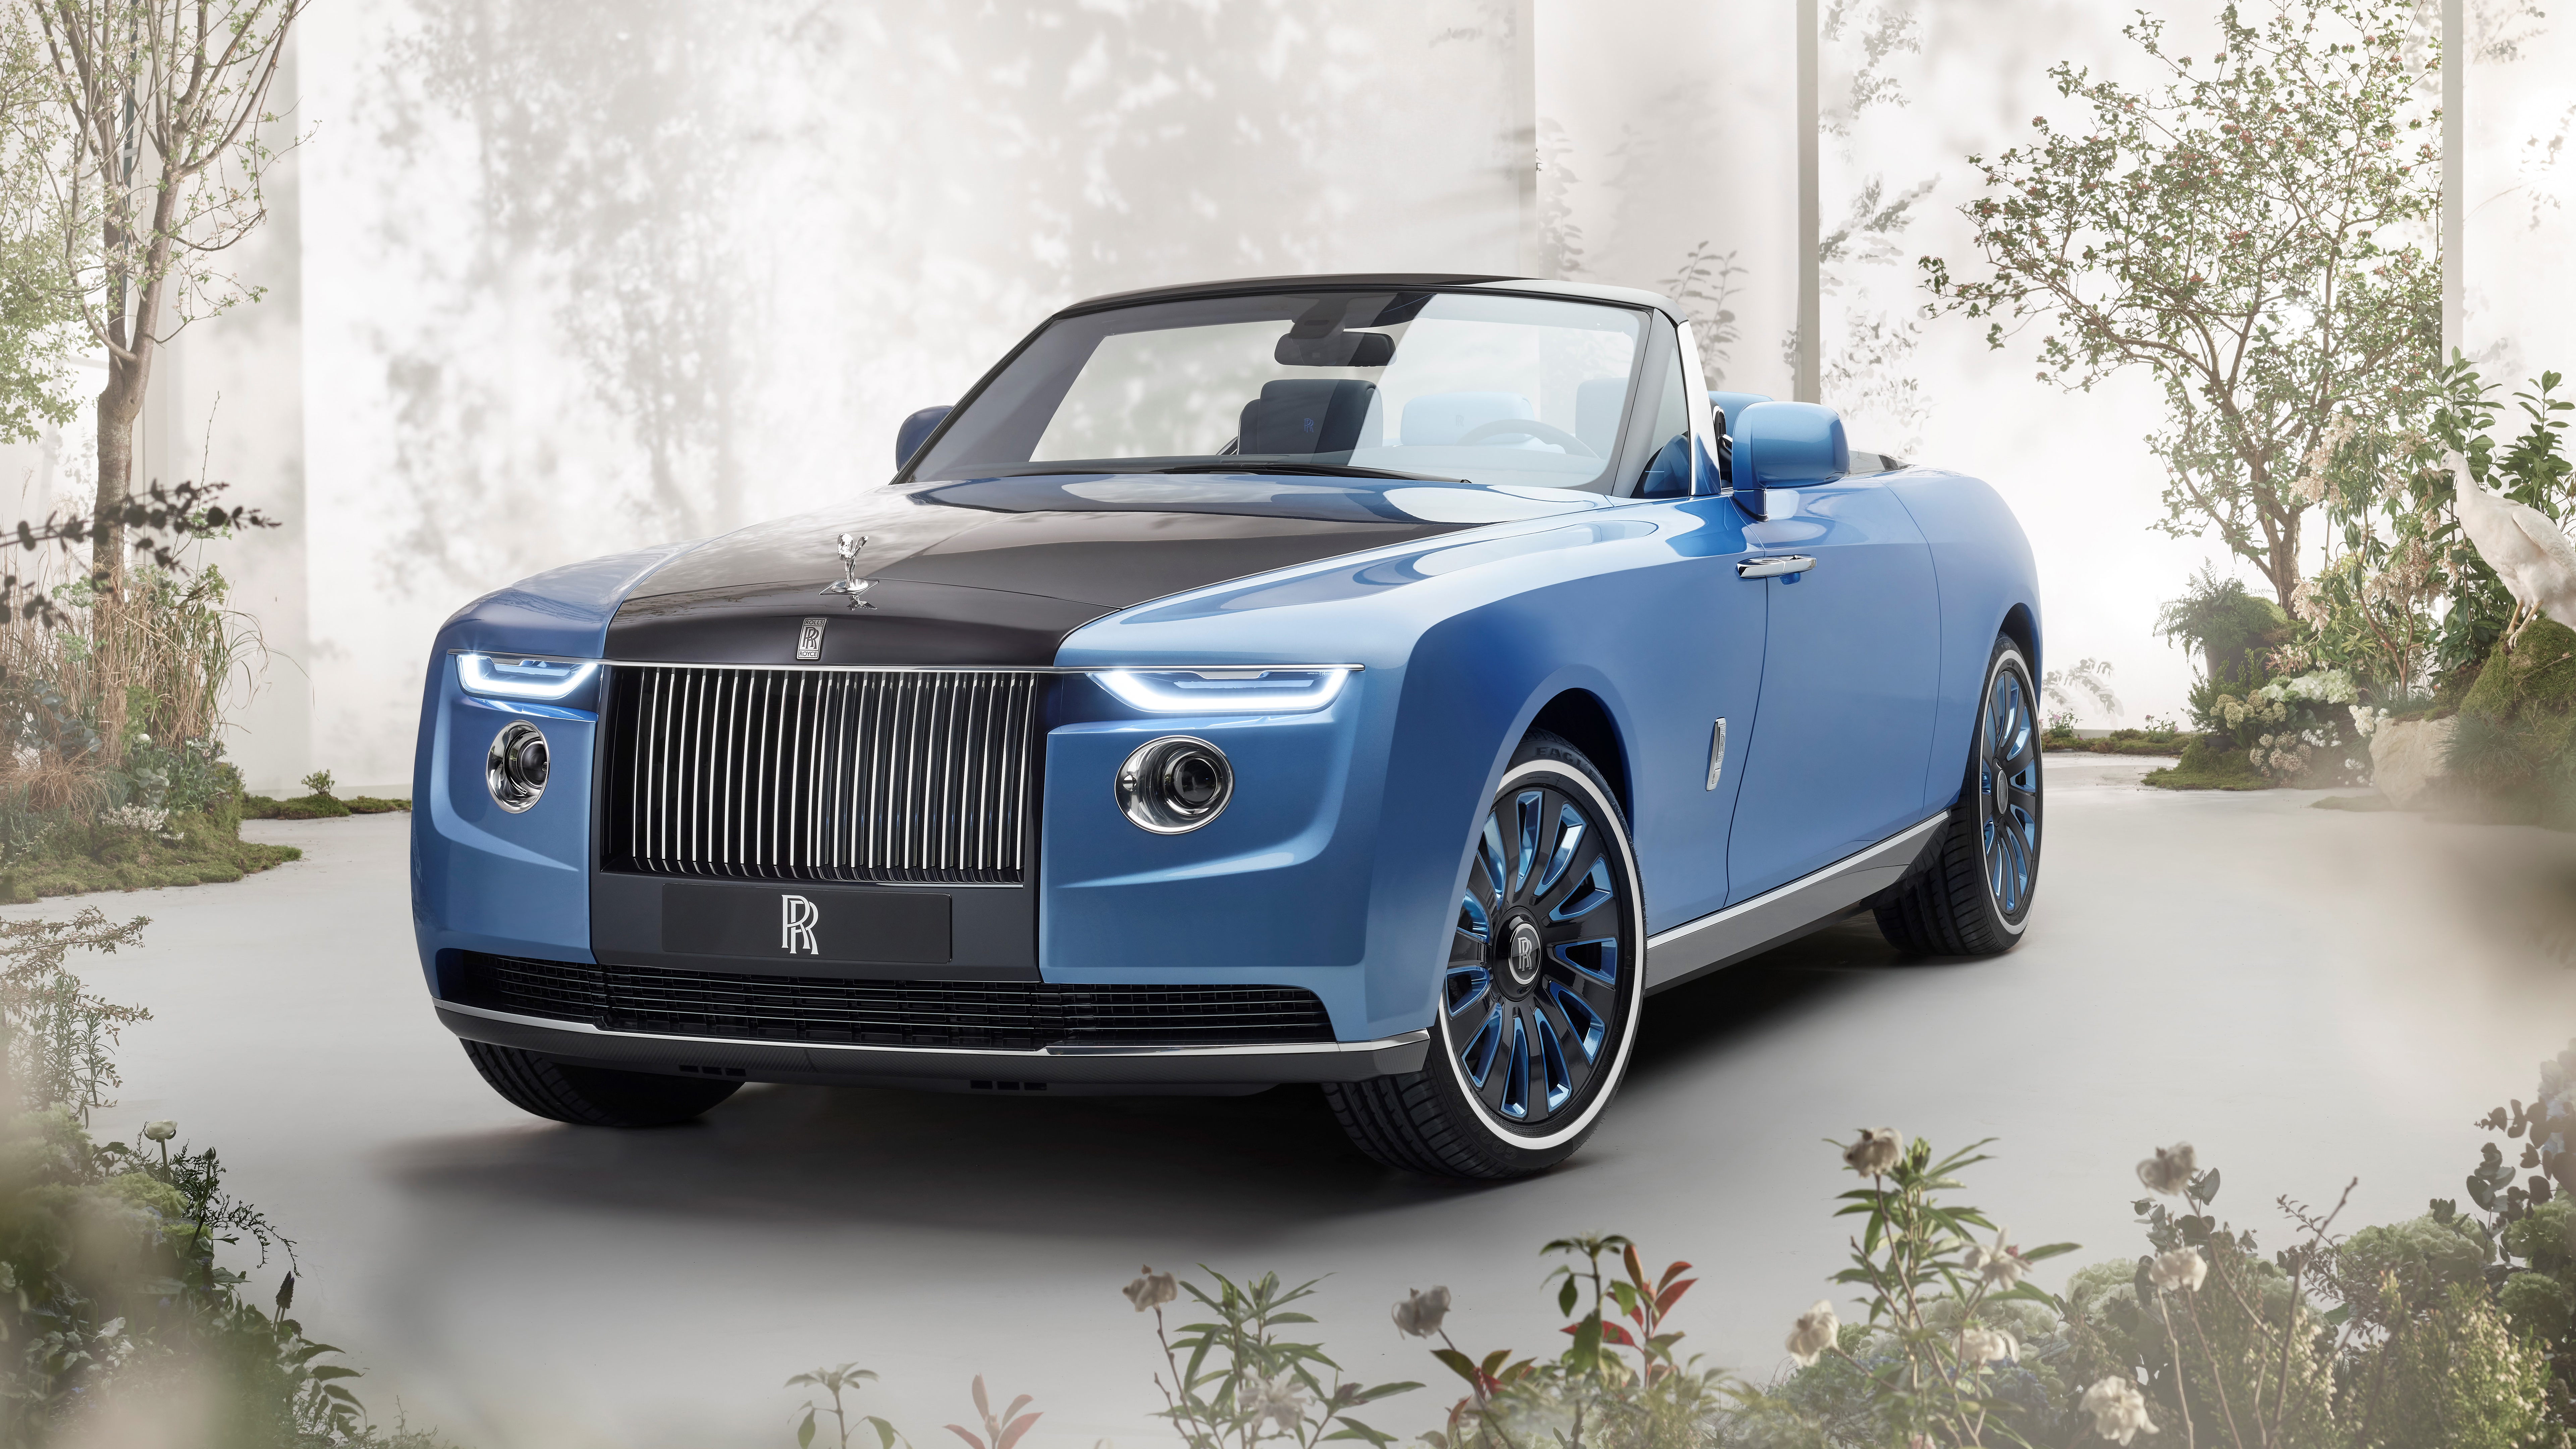 Bespoke 2021 Rolls Royce Boat Tail image gallery  Autocar India